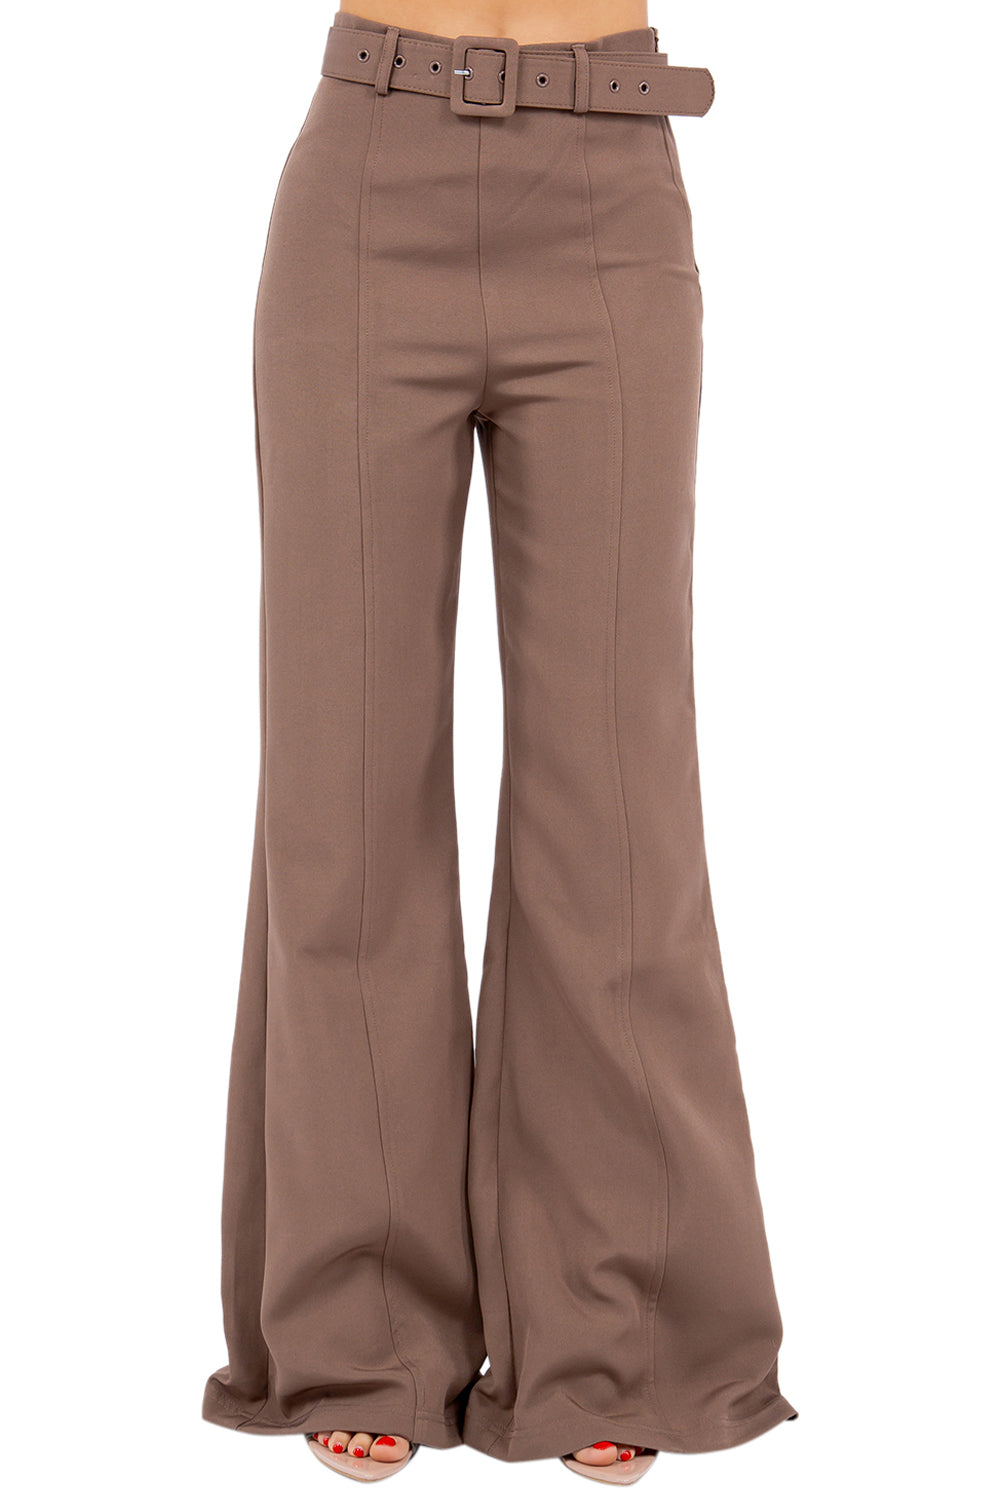 Women's High-Waisted Flared Pants with Belt